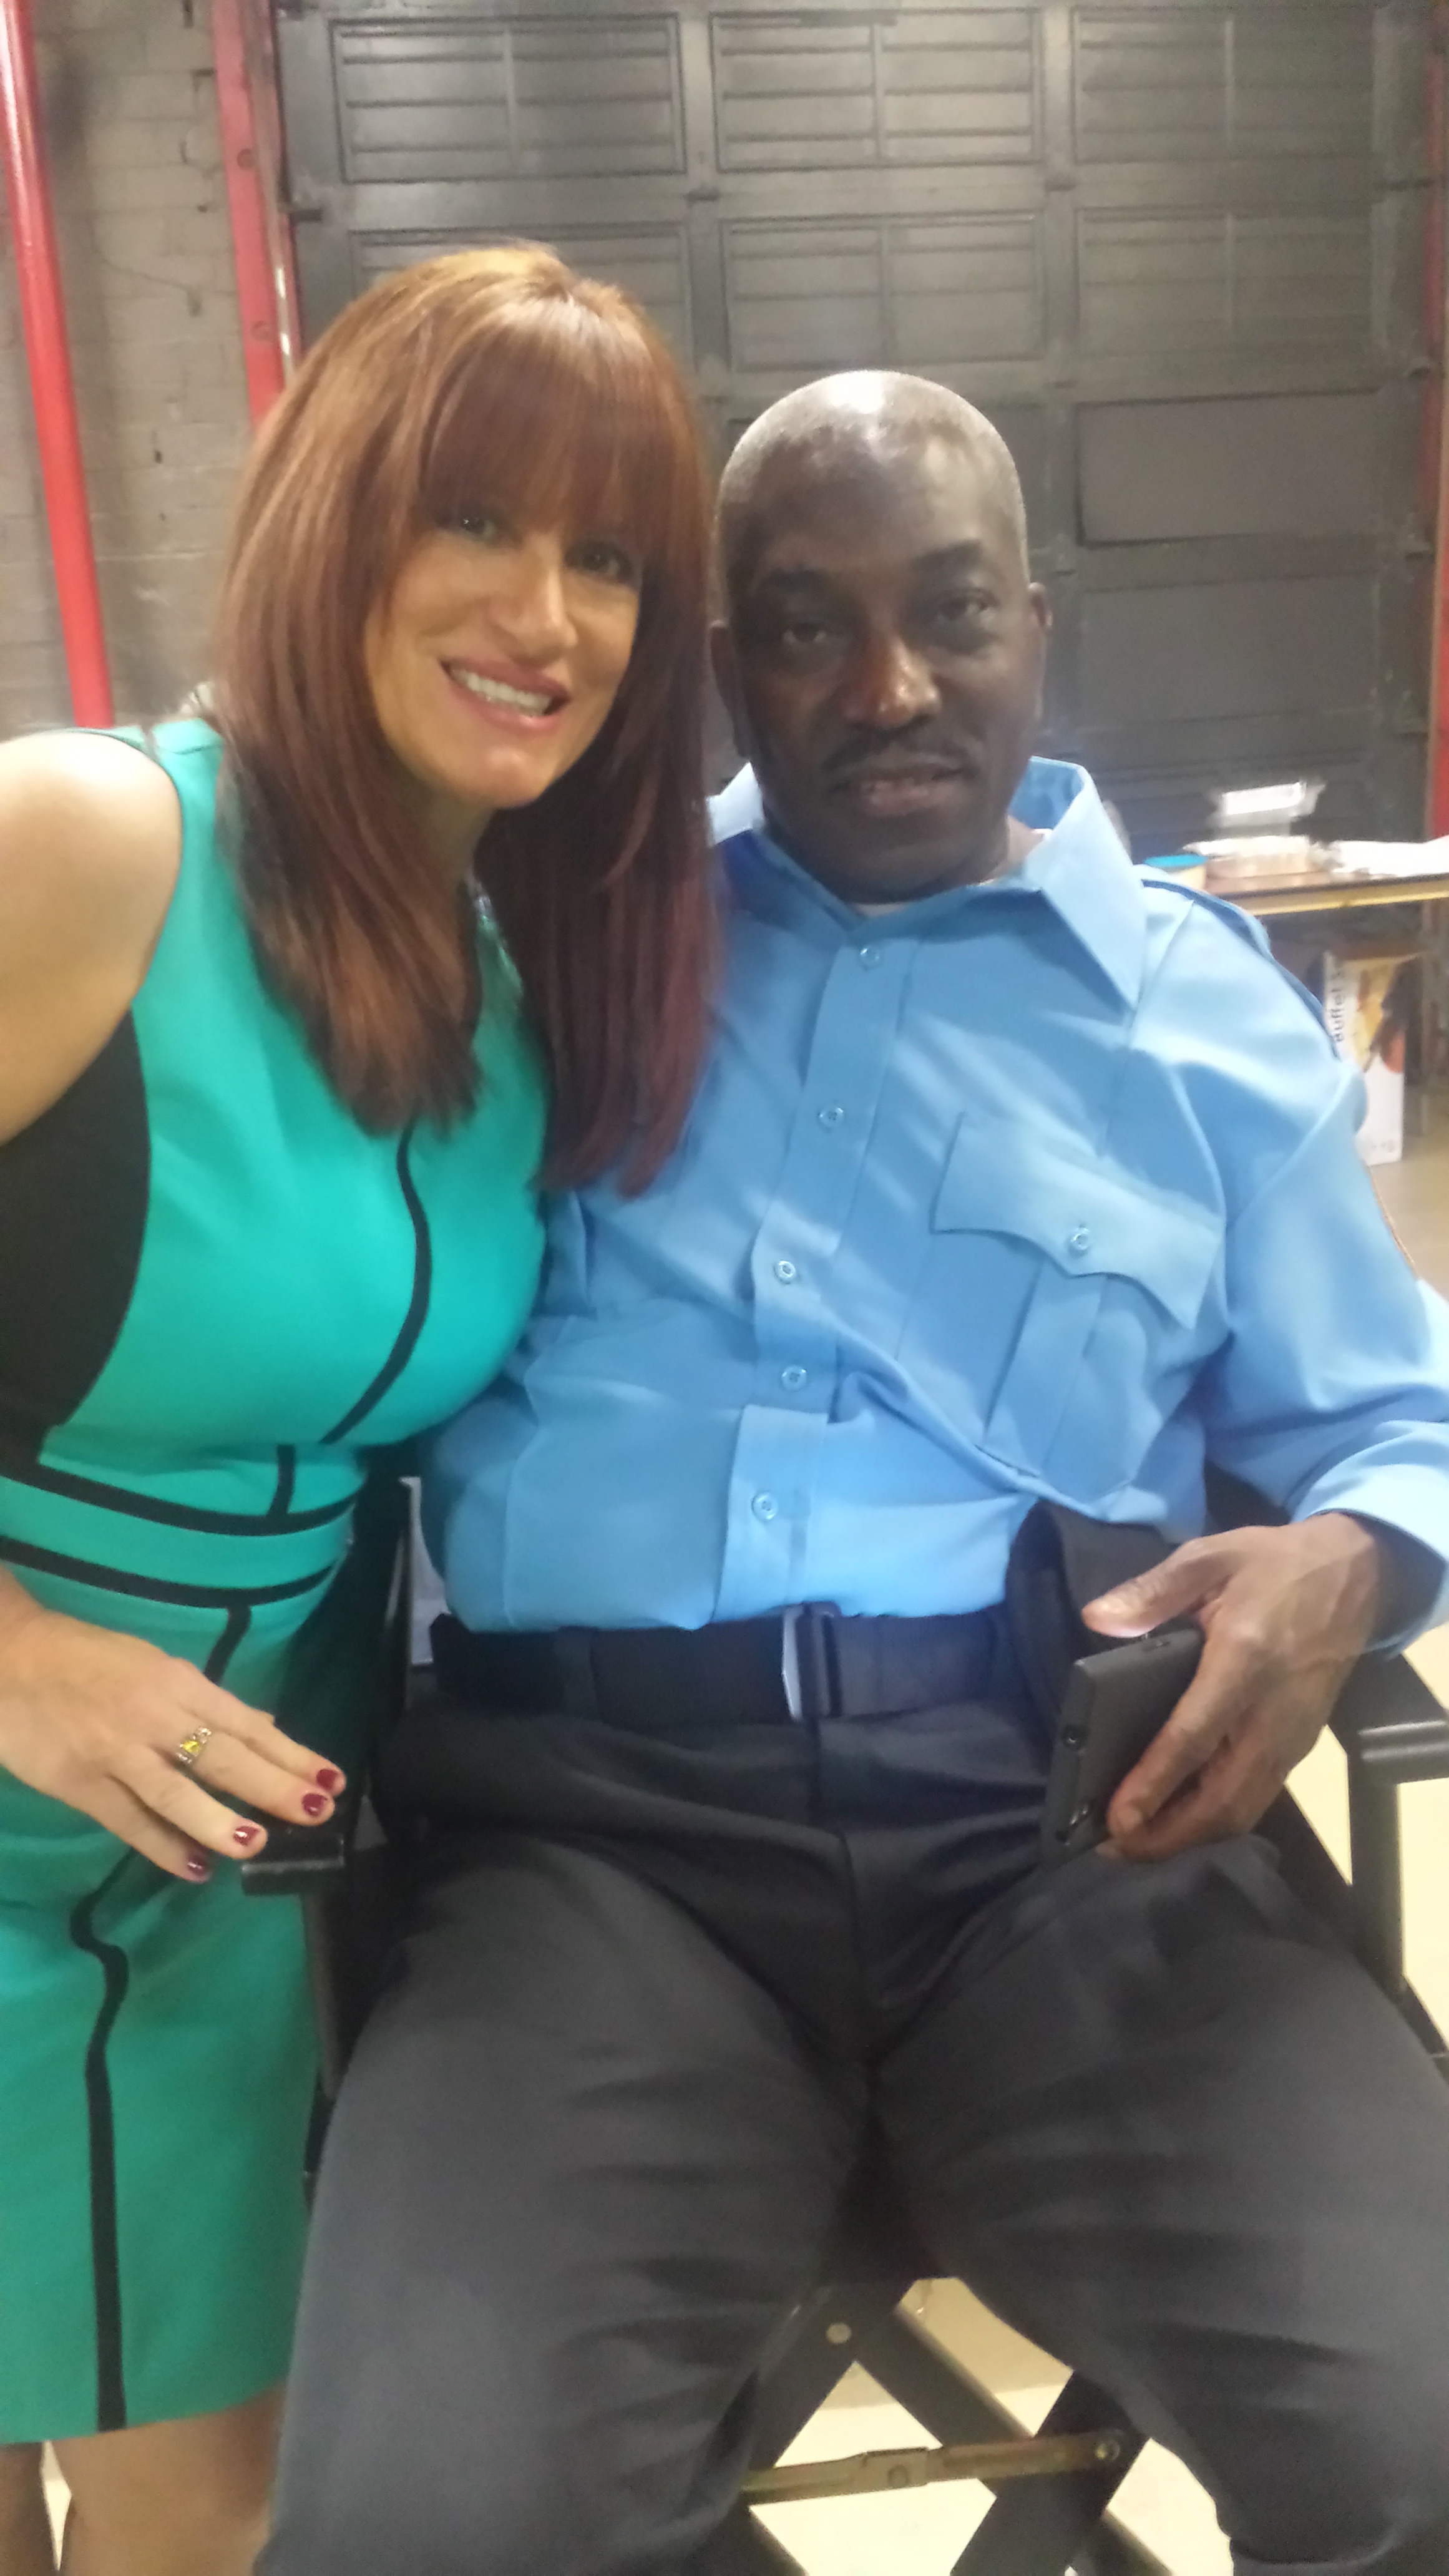 Clifton Powell(Capt. Pearson) and Connie Romano(News Reporter) on the set of 